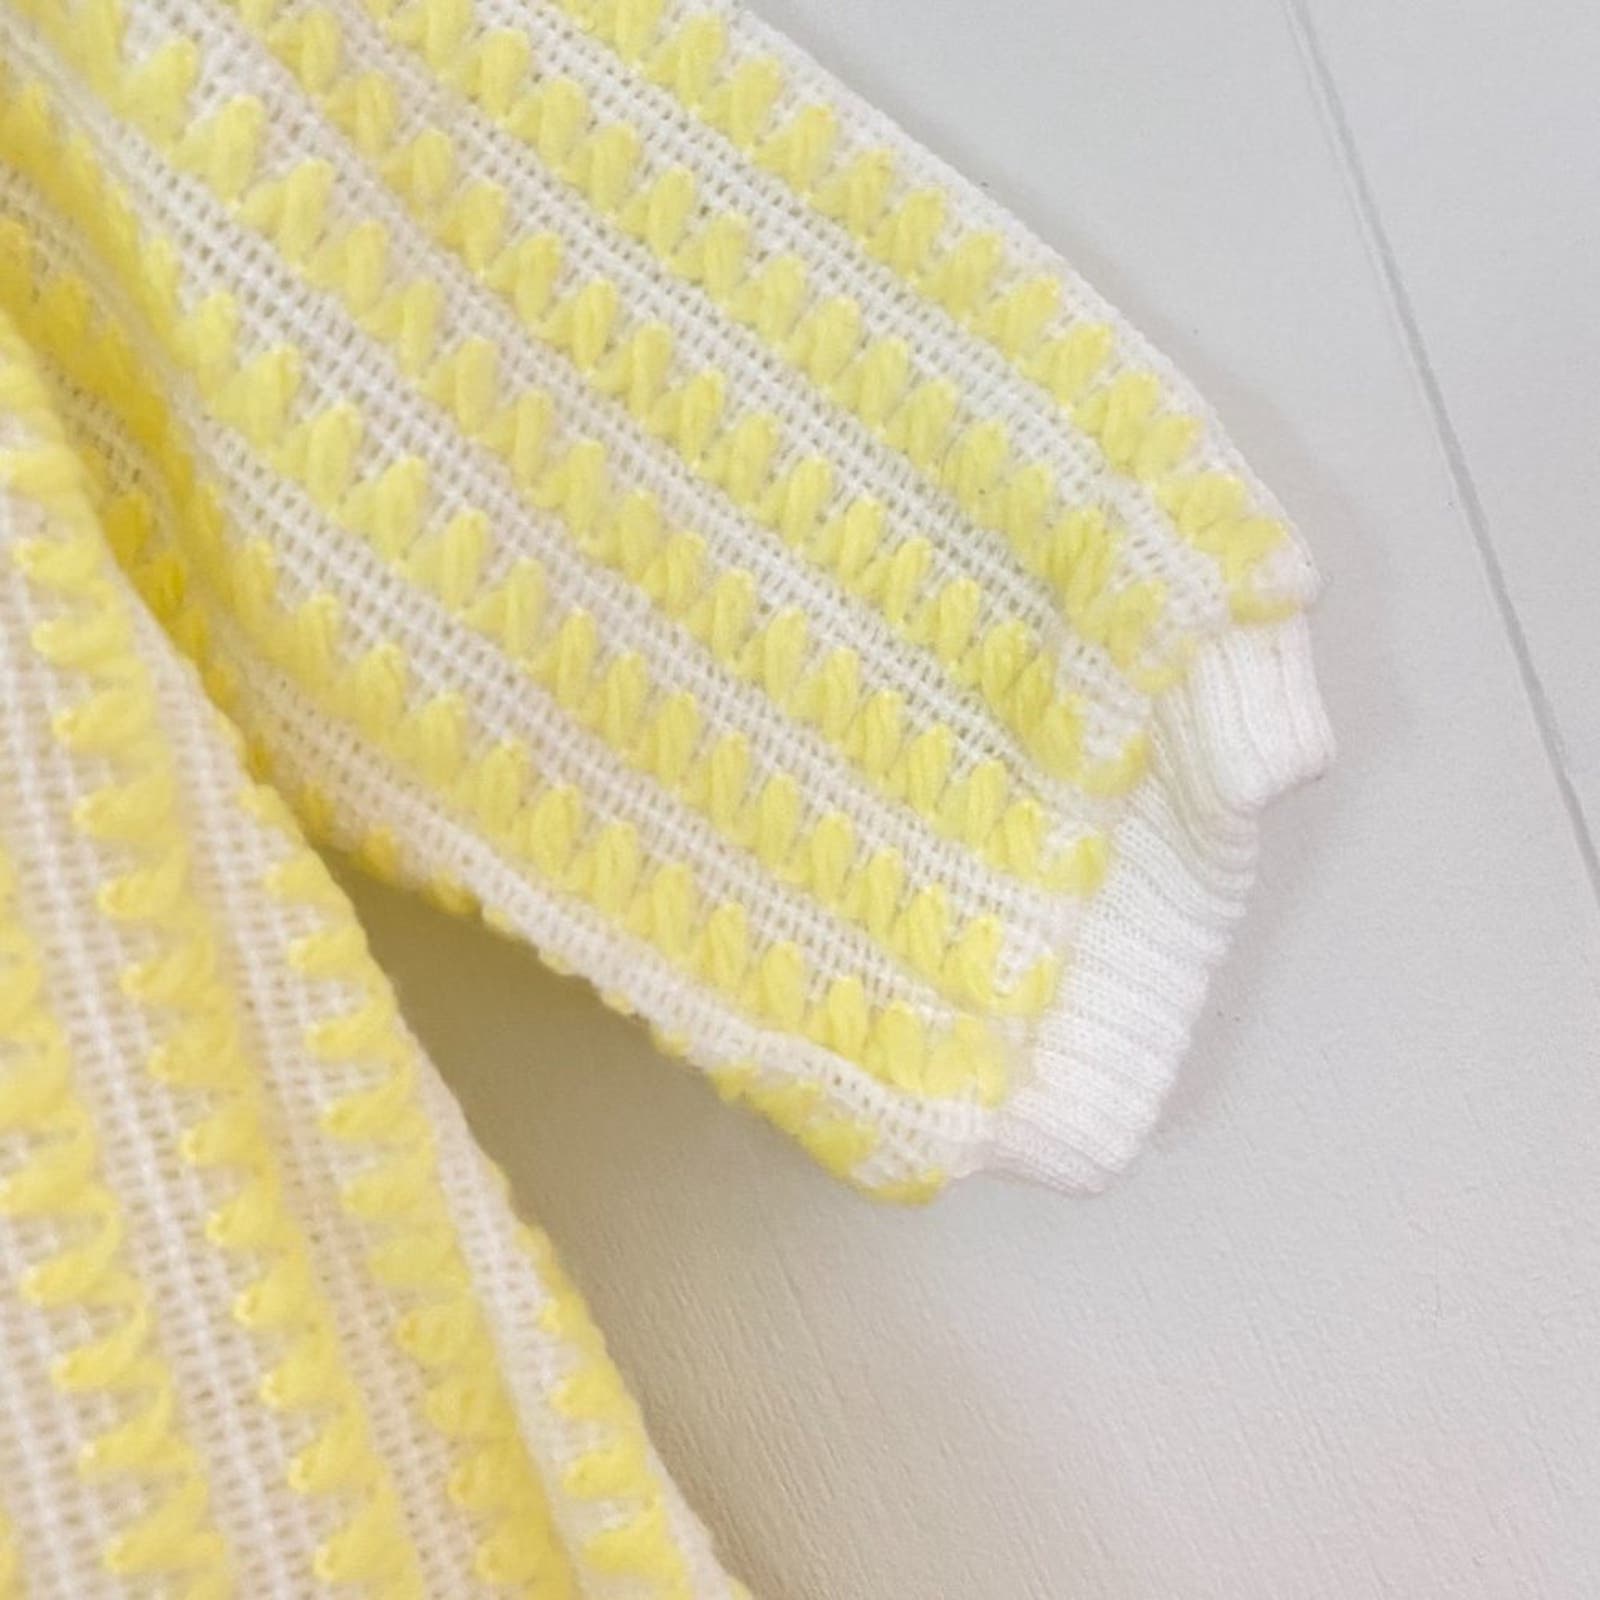 Vintage Novelty Knit Yellow Sweater Set 18 Months